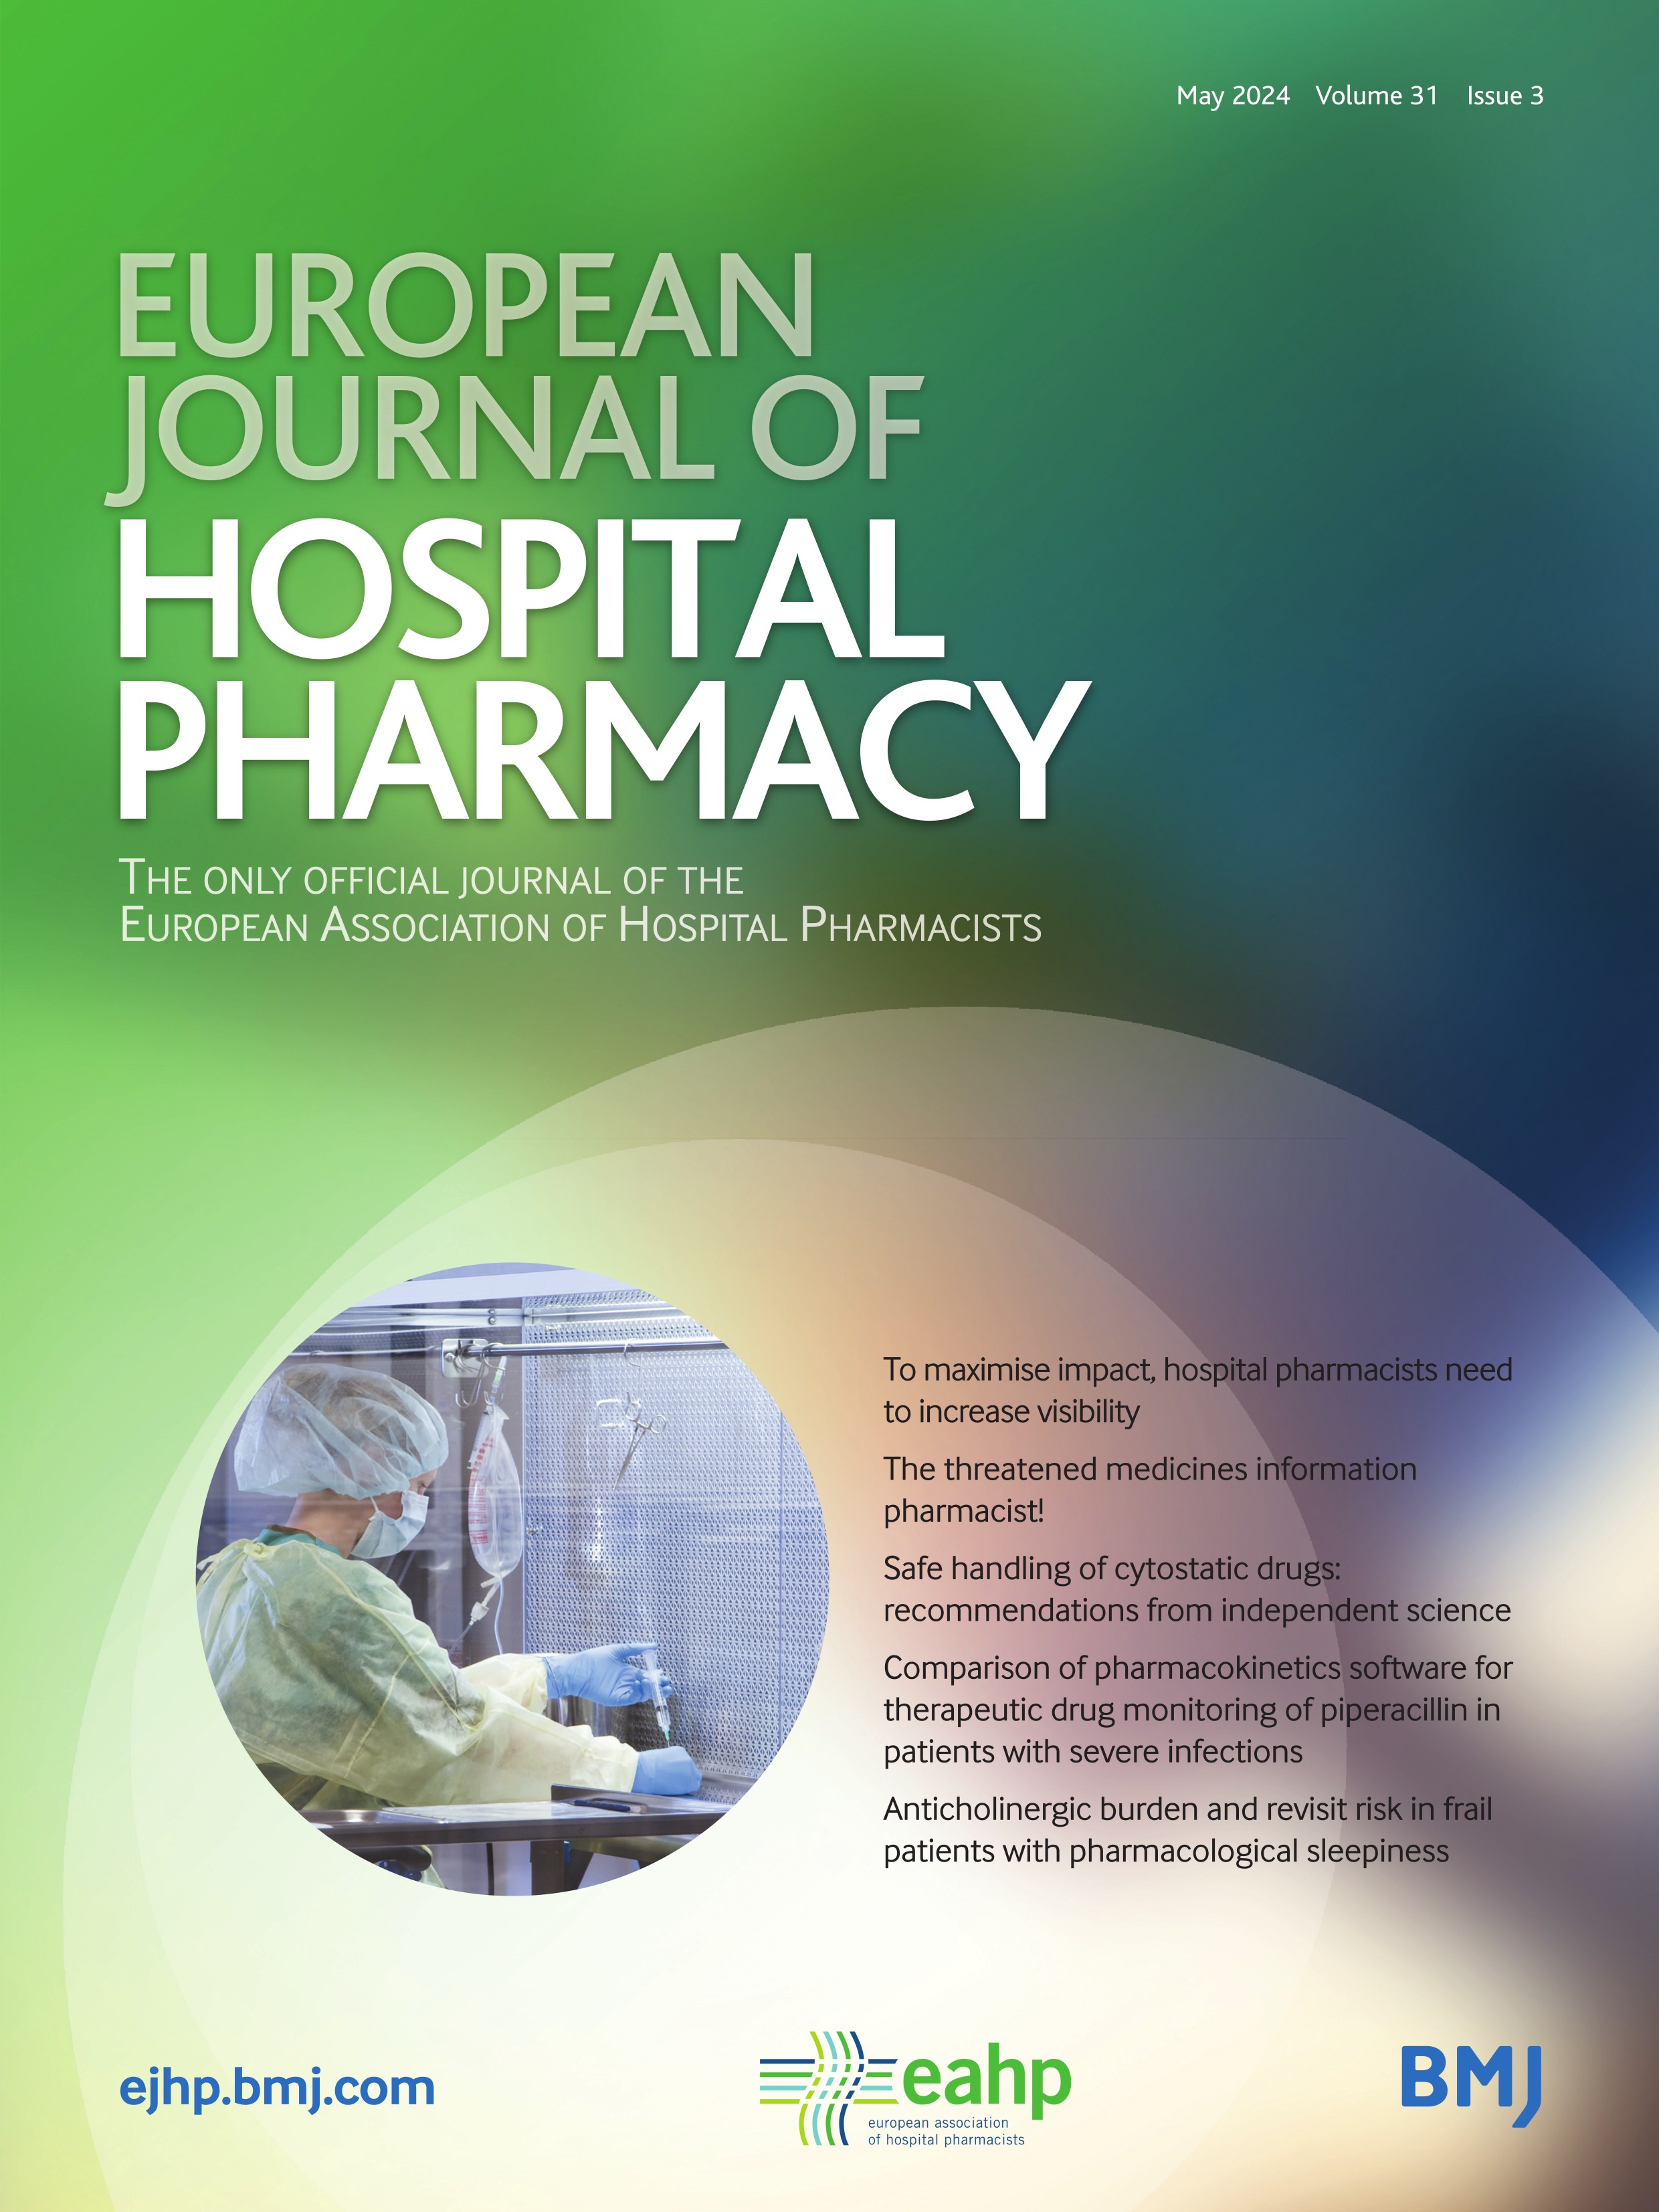 Using Healthcare Failure Mode and Effect Analysis in prospective medication safety risk management in secondary care inpatient wards